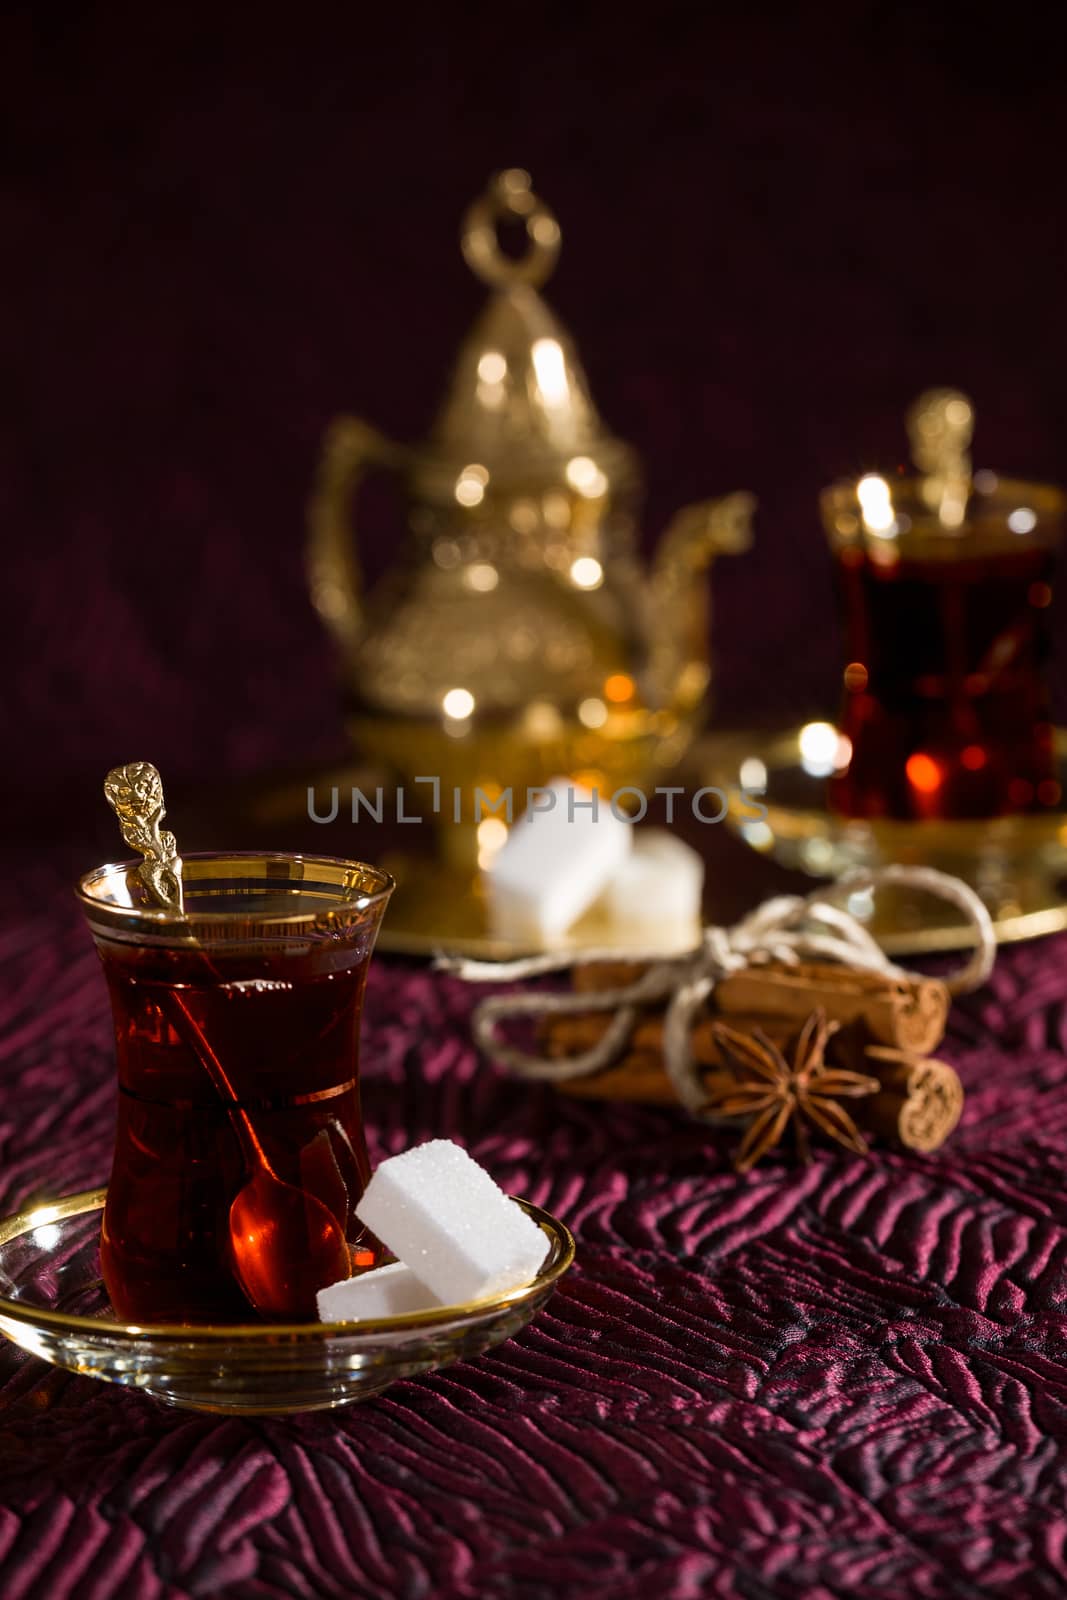 Turkish tea in traditional glass and tray on background